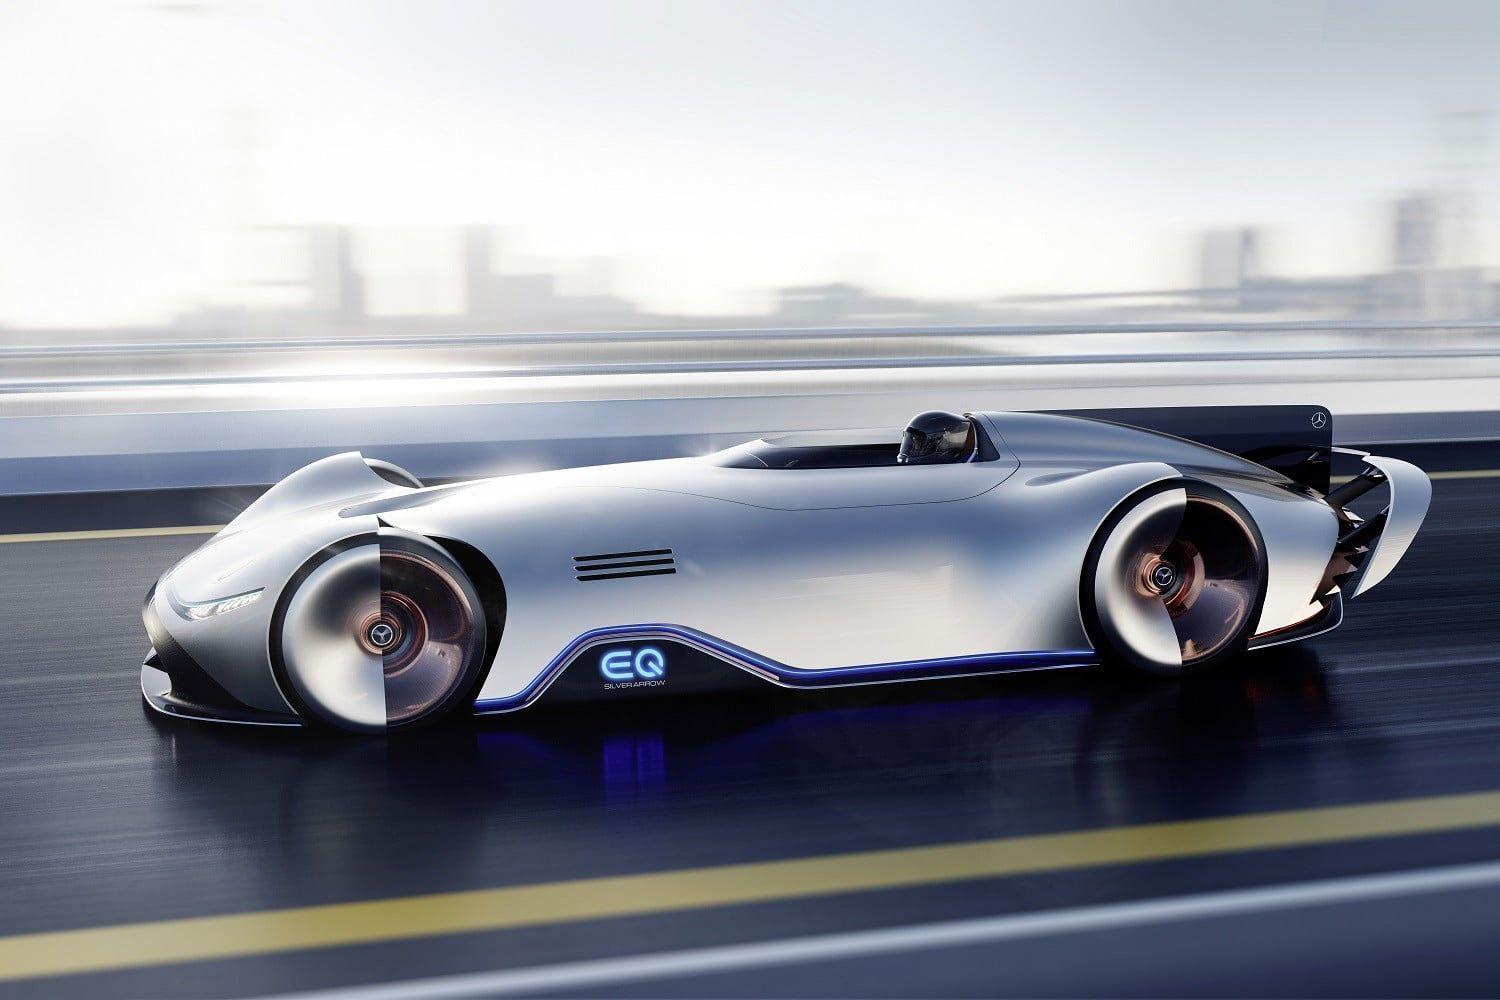 Two Silver Arrows Vehicle Logo - Mercedes Benz EQ Silver Arrow Concept Blends Heritage And Future